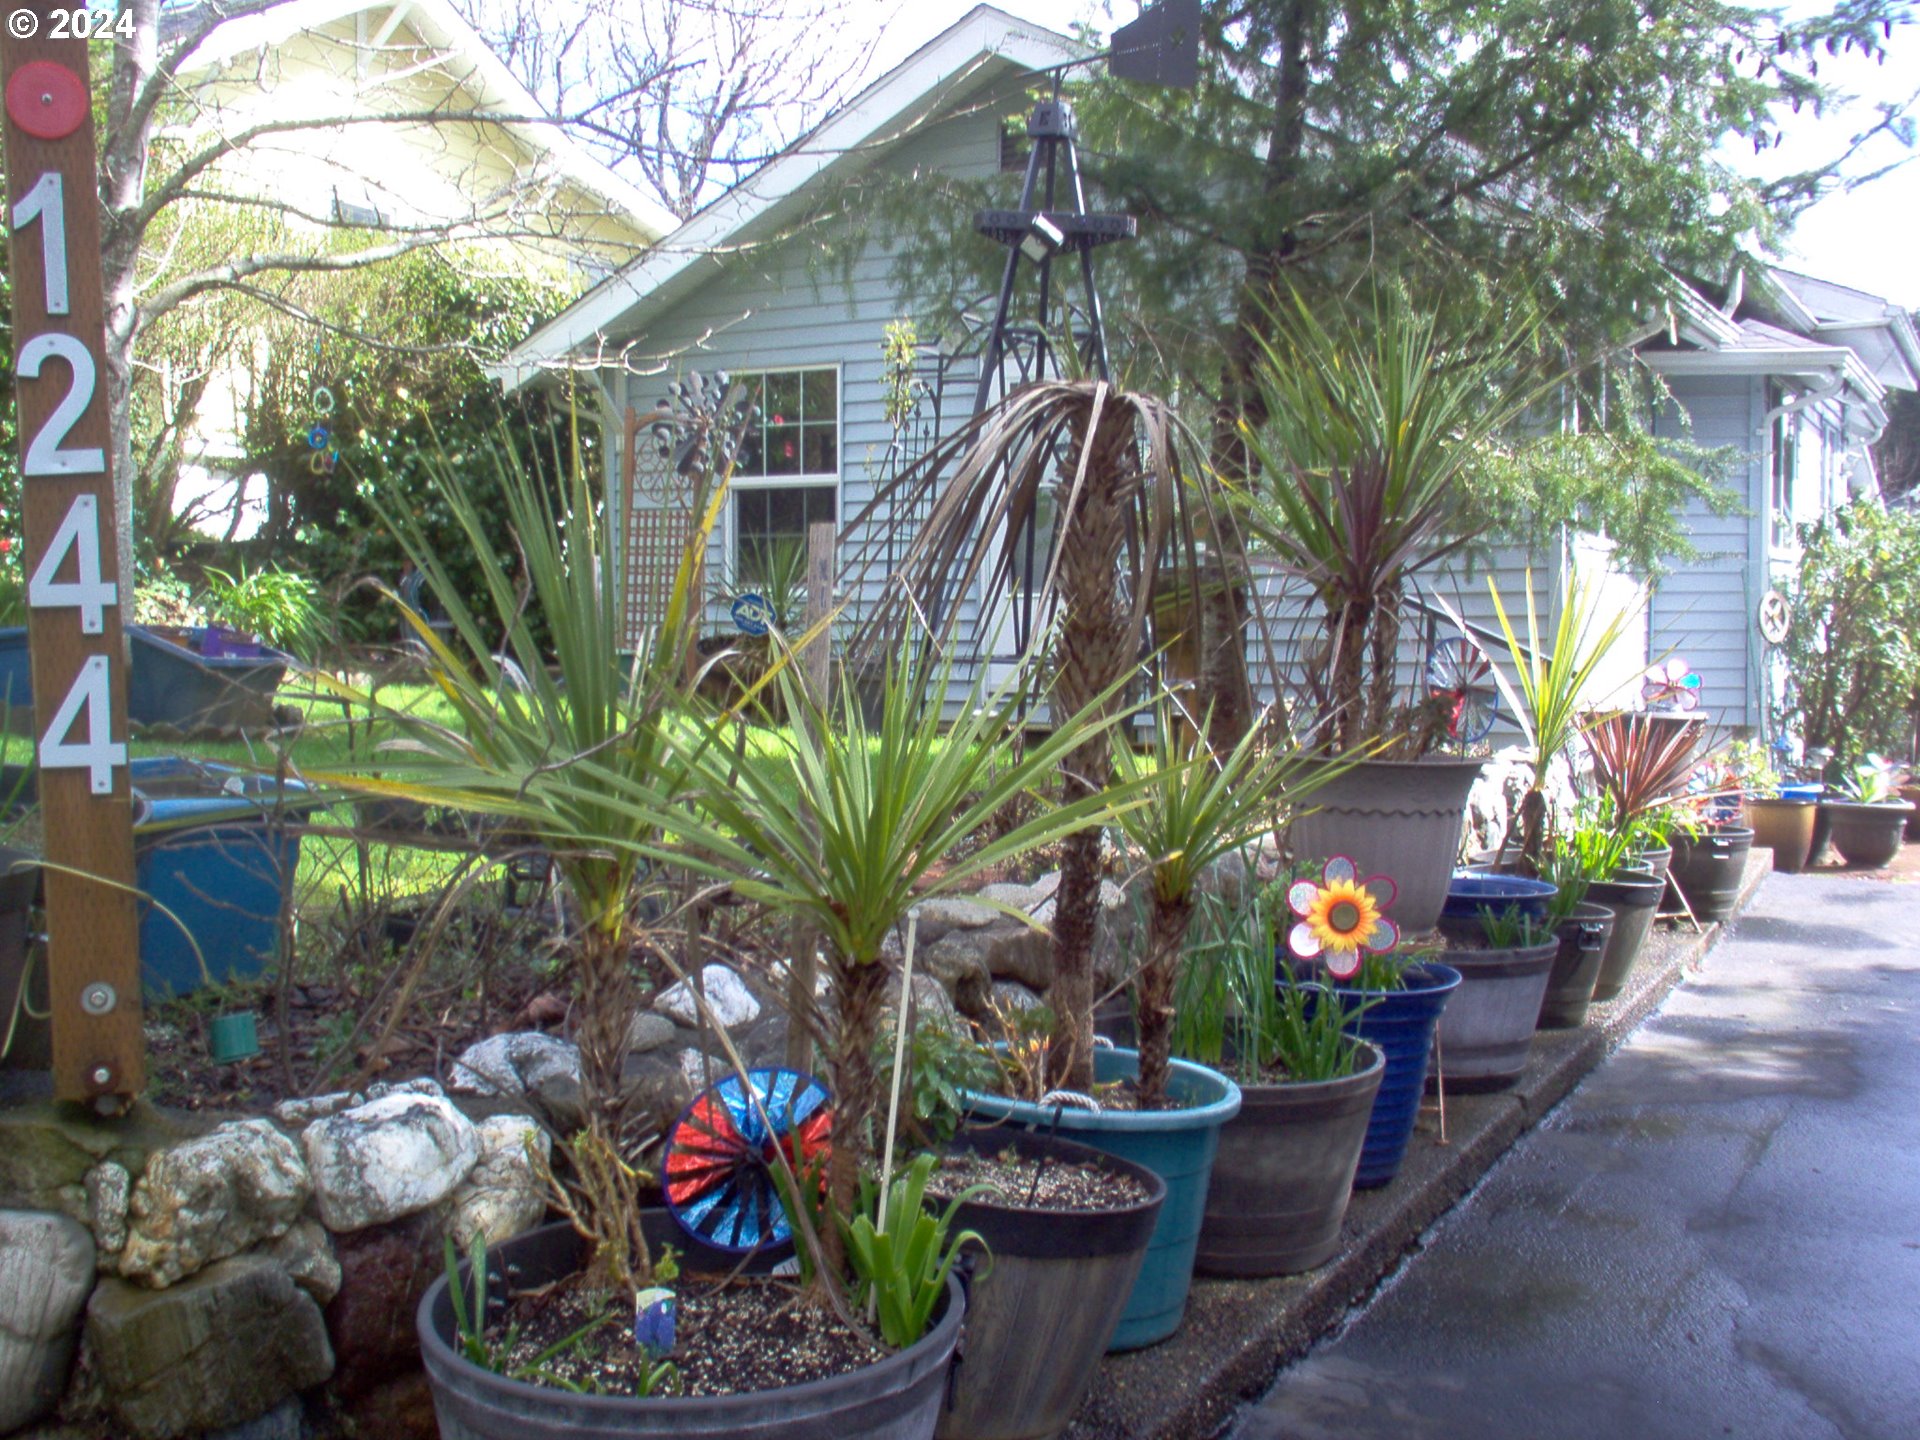 a front view of a house with a yard and a garden